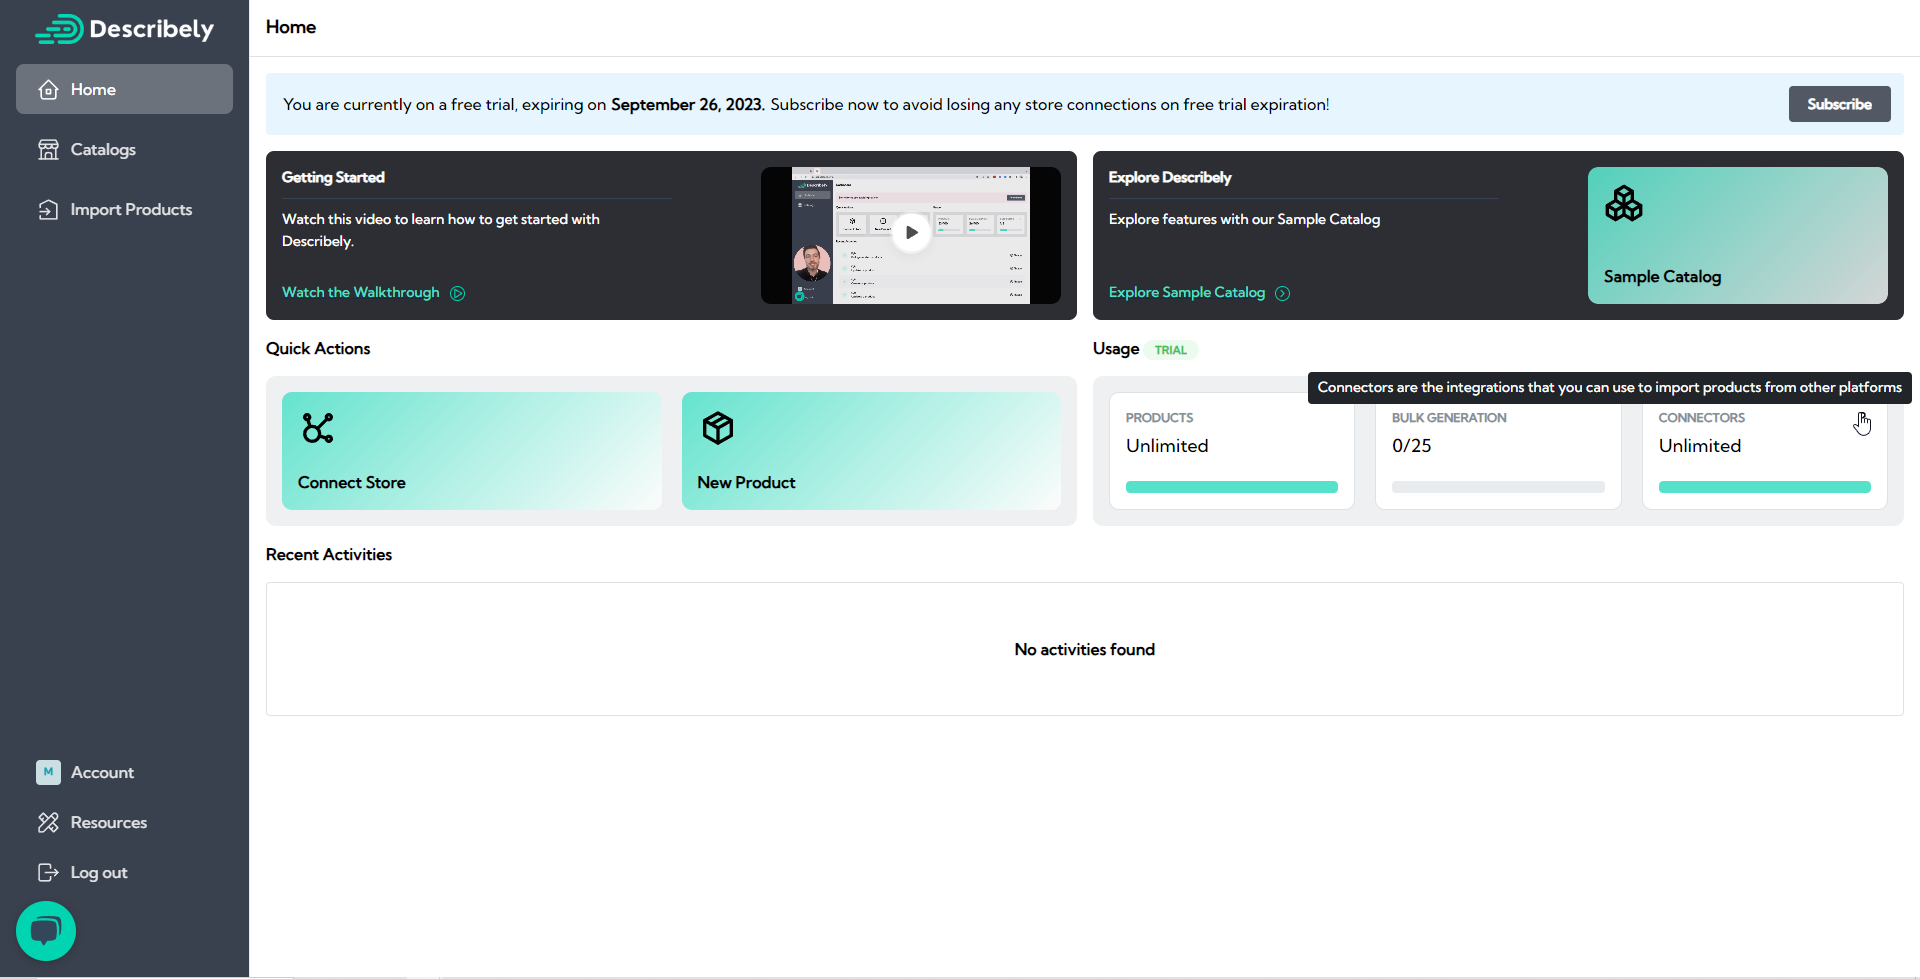 Screenshot of the Describely Dashboard after sign-up